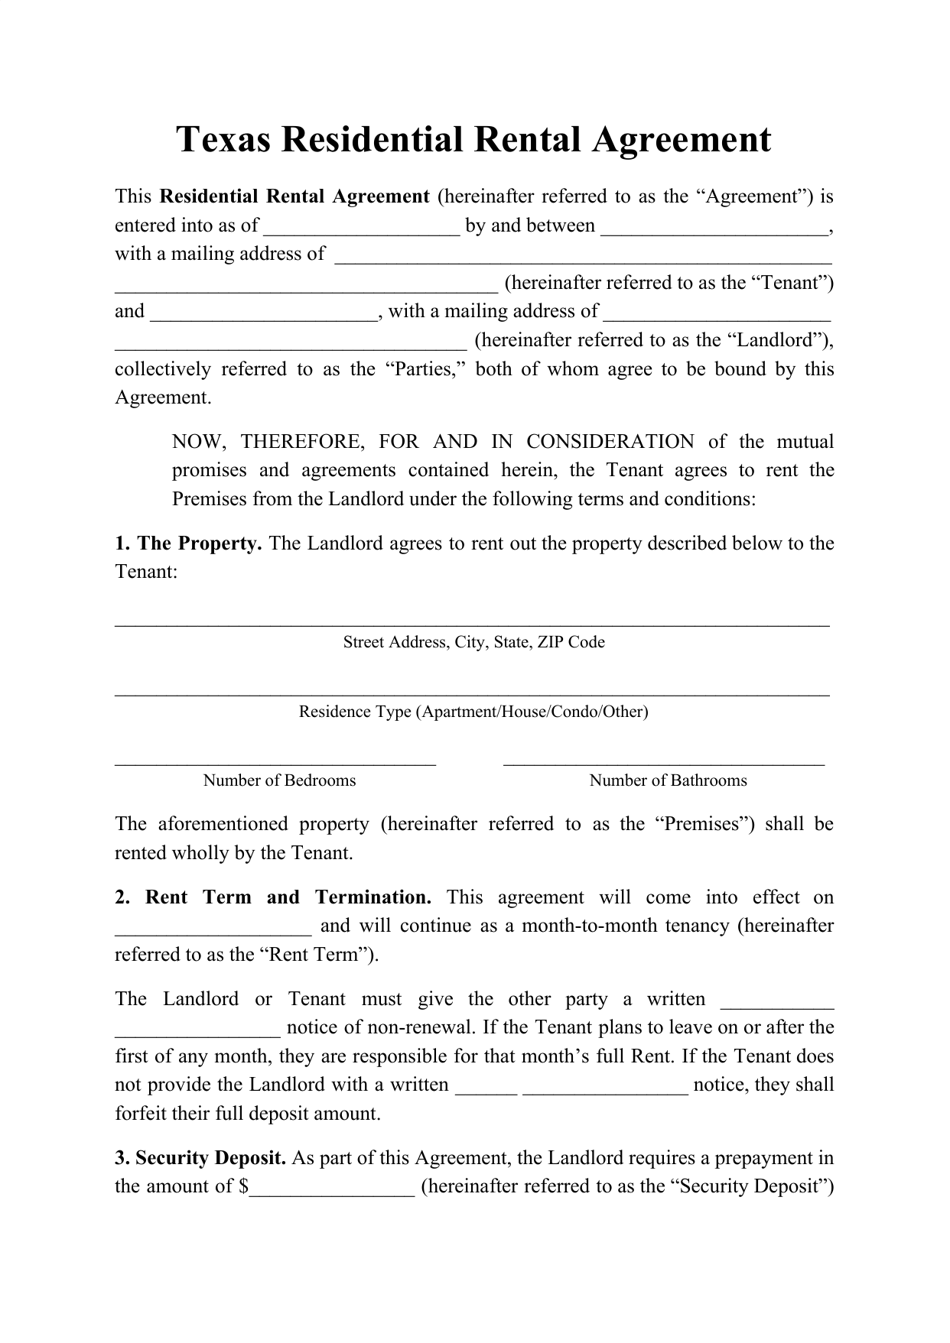 Residential Rental Agreement Template - Texas, Page 1